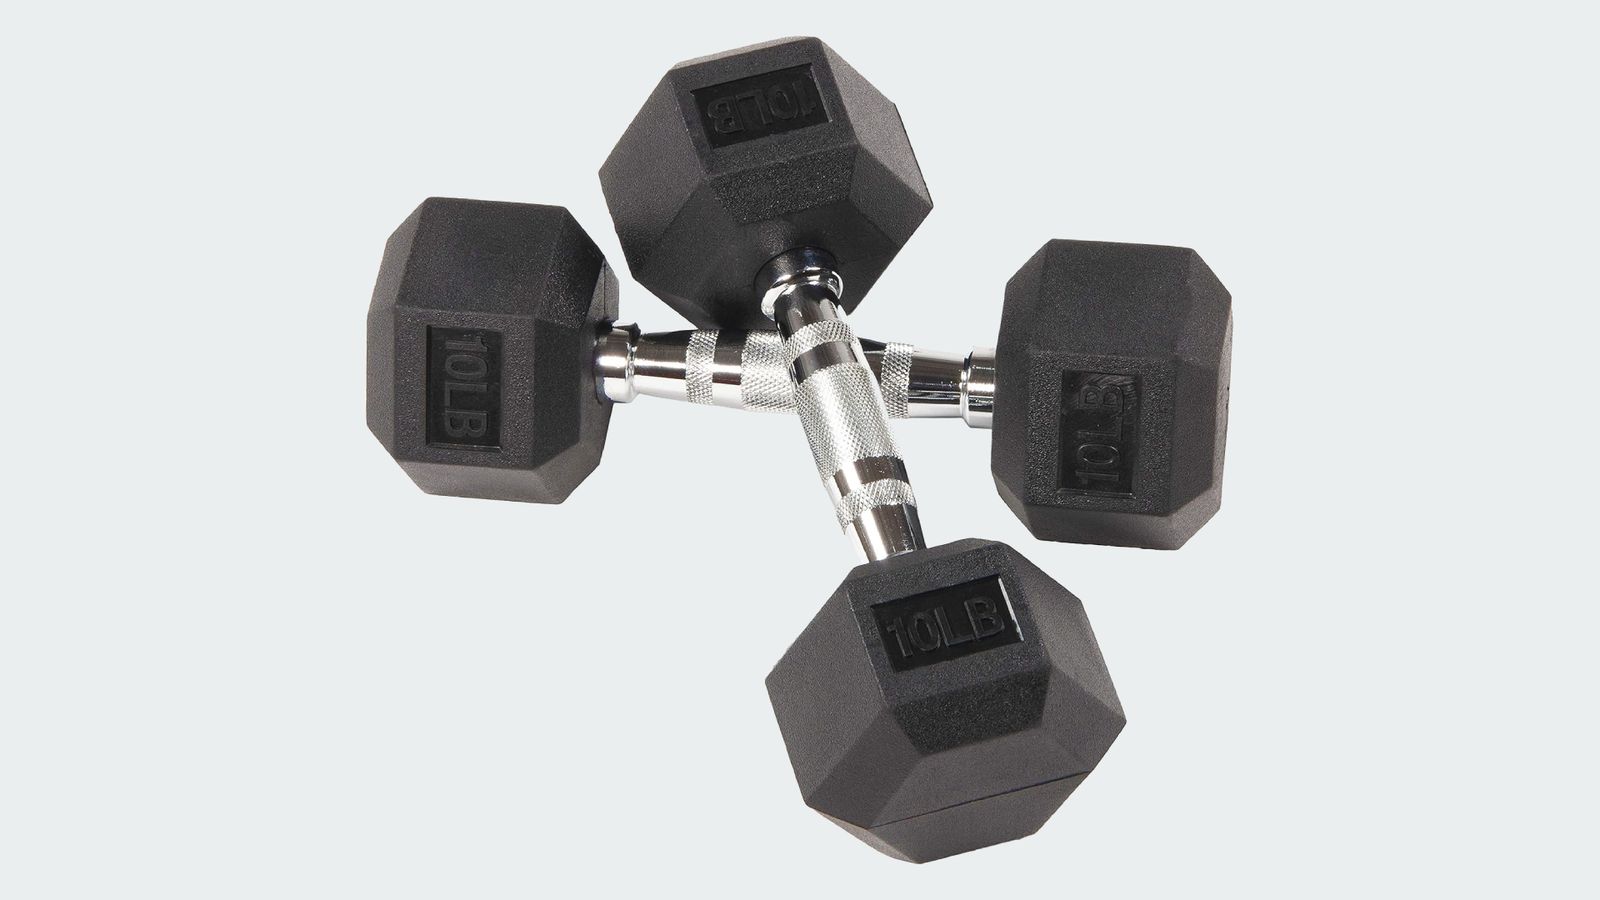 Signature Fitness Rubber Encased Hex Dumbbell product image of a pair of black hexagonal dumbbels with silver metal handles.